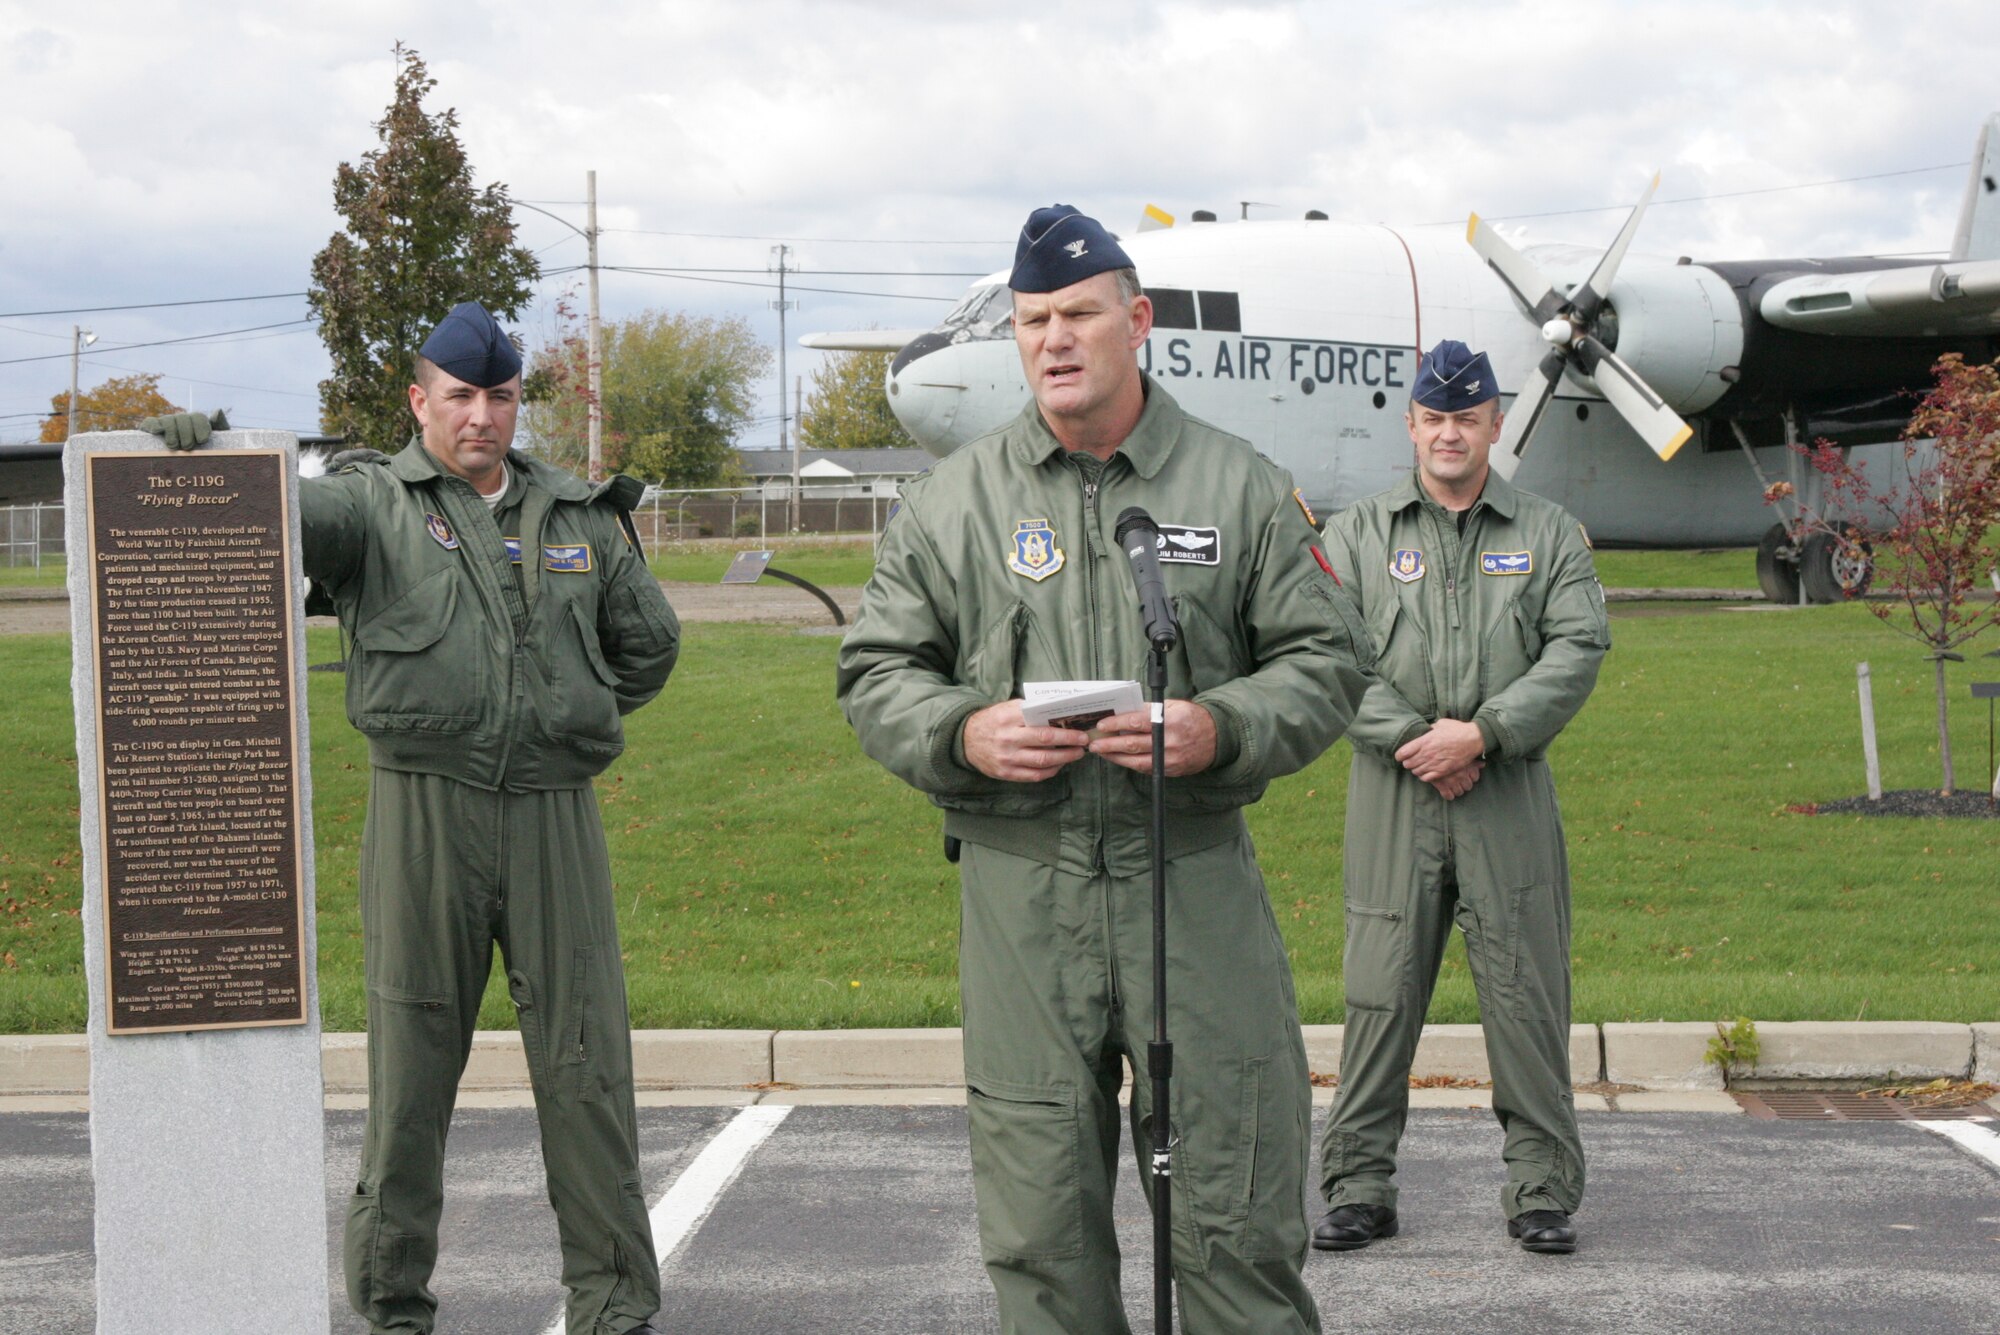 NIAGARA FALLS AIR RESERVE STATION, NY- 914th AW Commander Col. James Roberts (center) speaks to a crowd during  the C-119 dedication ceremony held here recently while 440th AW Commander Col. Merle Hart (right) and Senior Master Sergeant Flores of the 440th AW (left) look on.  The C-119 was acquired from the 440th AW stationed at General Mitchell Air Reserve Station, Wisconsin.  Due to the Base Realignment & Closure Commissions decision to close Gen. Mitchell ARS all assets are being distributed and utilized throughout the Air Force.  The C-119 was dismantled at Gen Mitchell ARS, transported by tractor trailer to Niagara Falls ARS where it was reassembled and dedicated as a reminder to the 914th AW historical linage.  Photo by: Senior Master Sergeant (Ret.) Mike Harvey (Released)